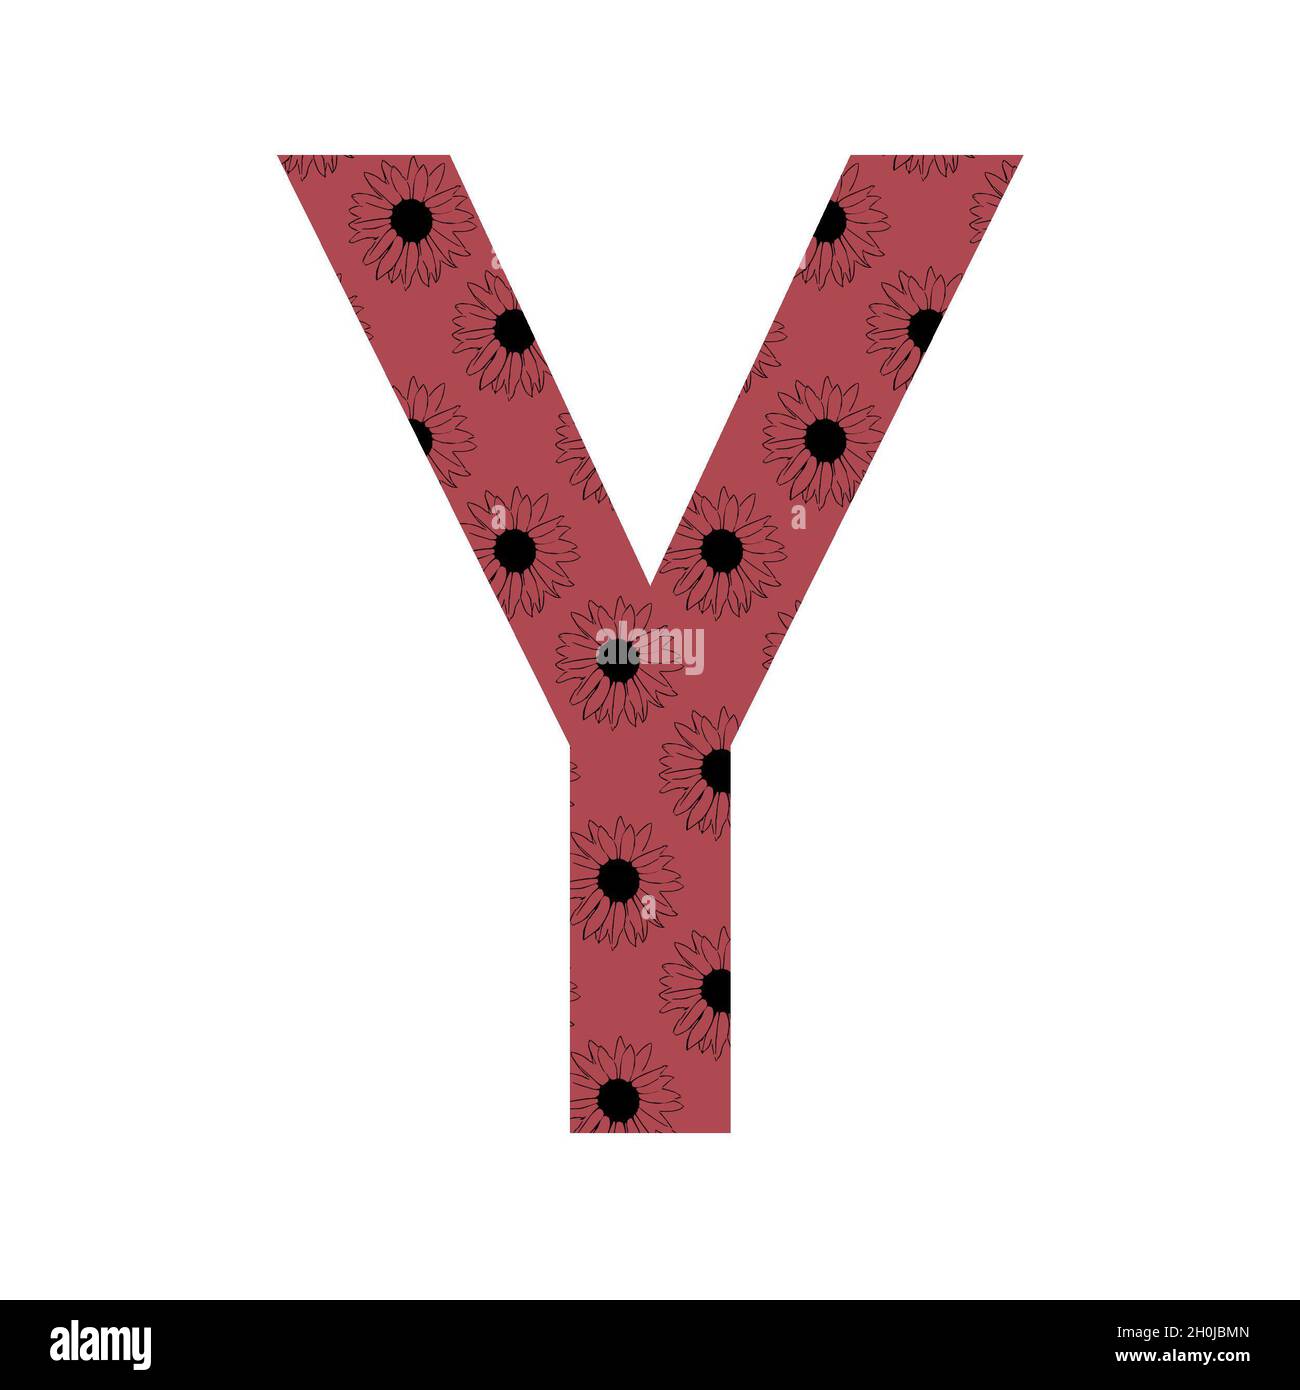 Letter Y of the alphabet made with a pattern of sunflowers with a dark pink background, isolated on a white background Stock Photo